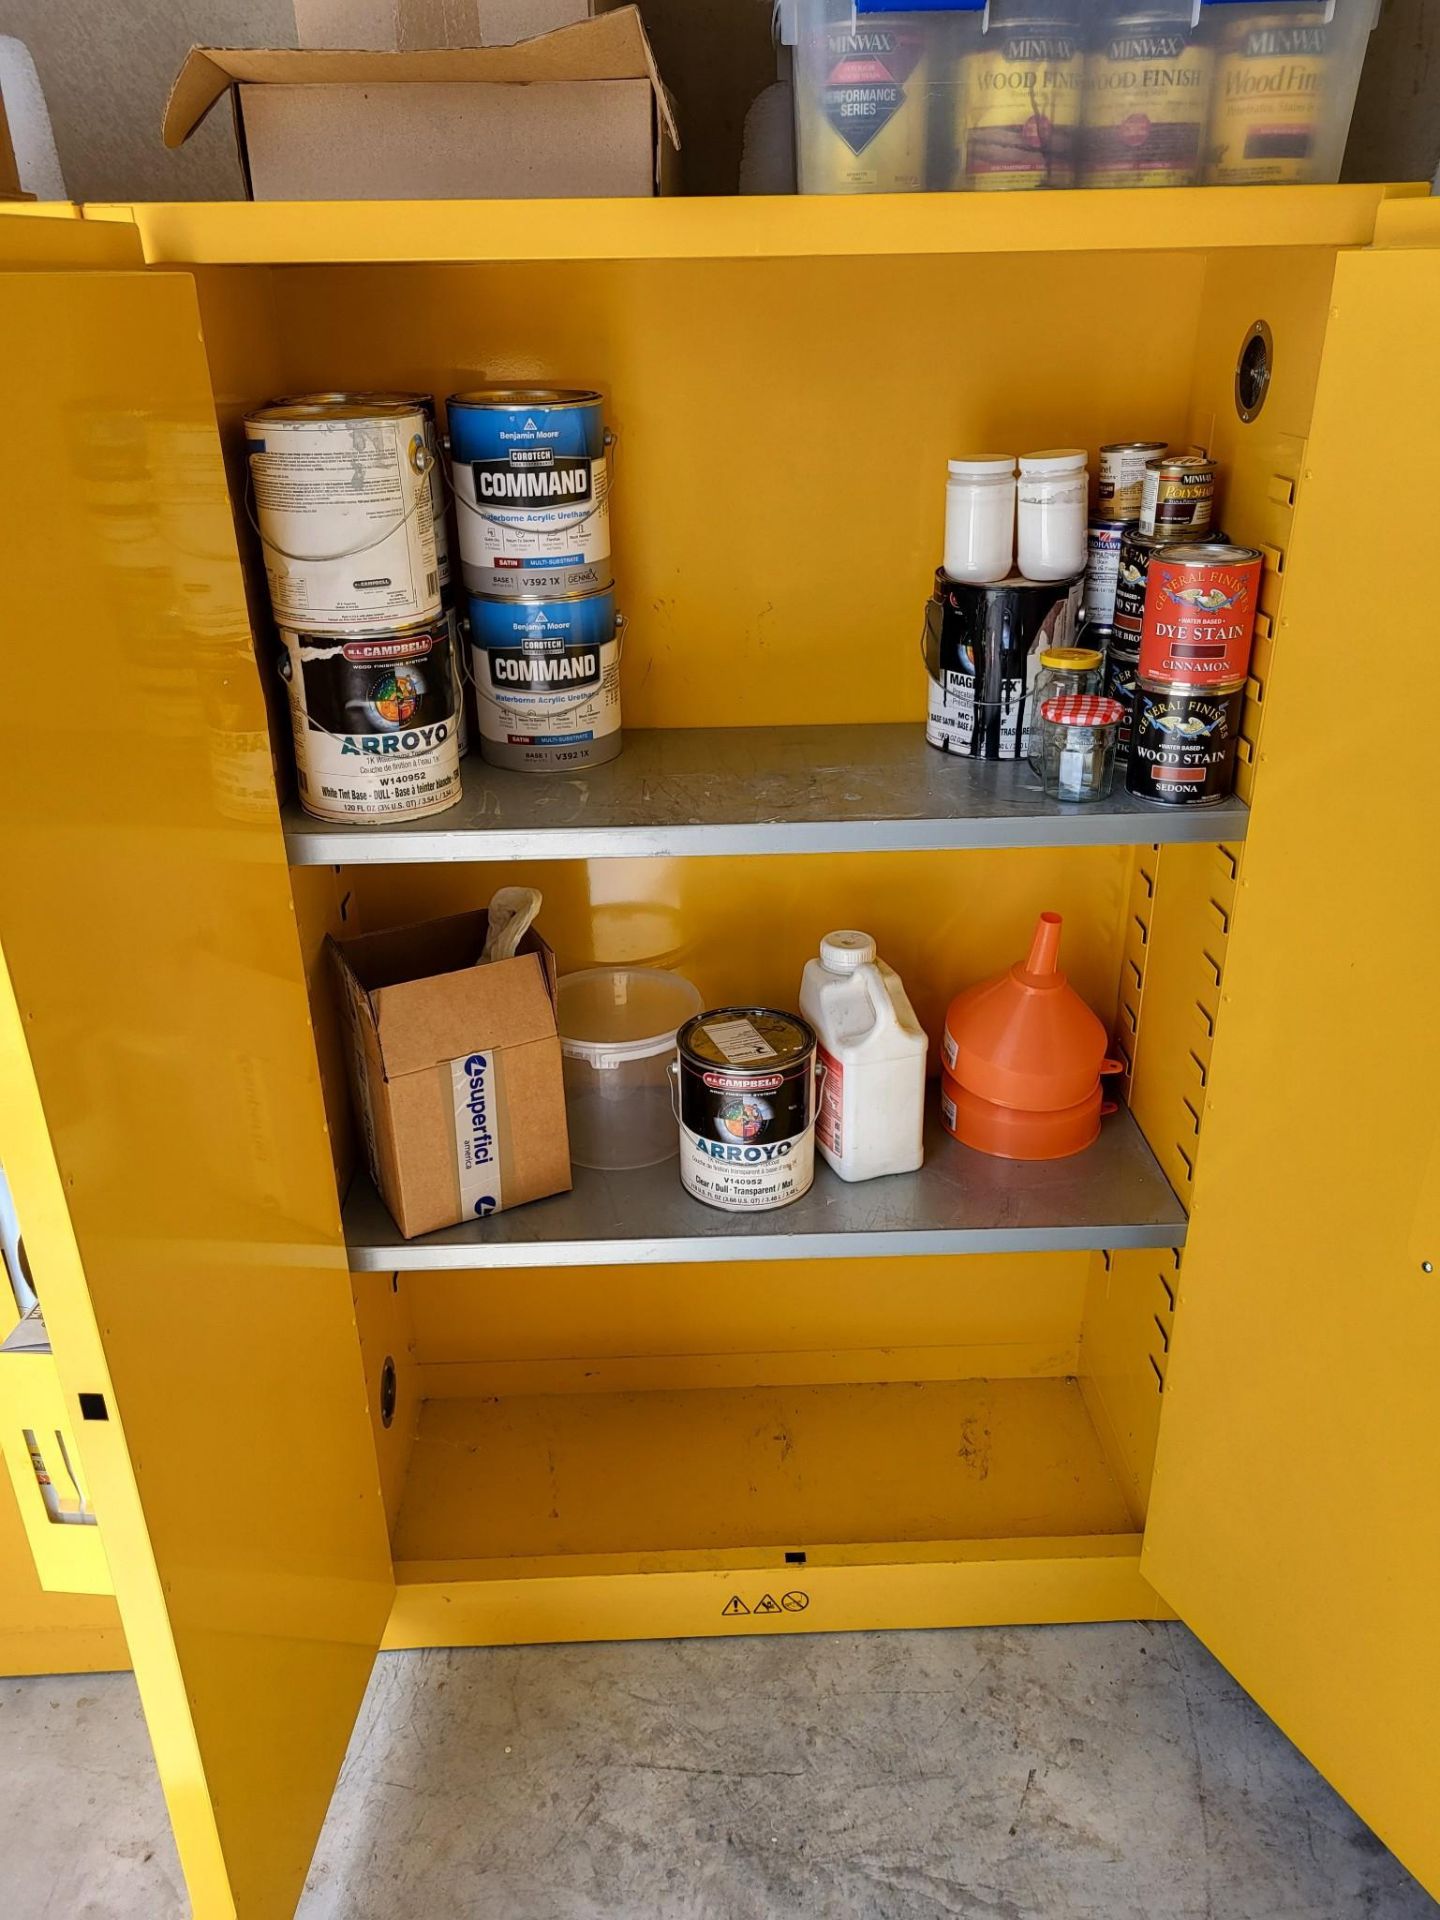 (2) EDSAL YELLOW METAL FIRE SAFE STORAGE CABINETS (CAN HOLD CLASS 3 LIQUIDS) - Image 3 of 5